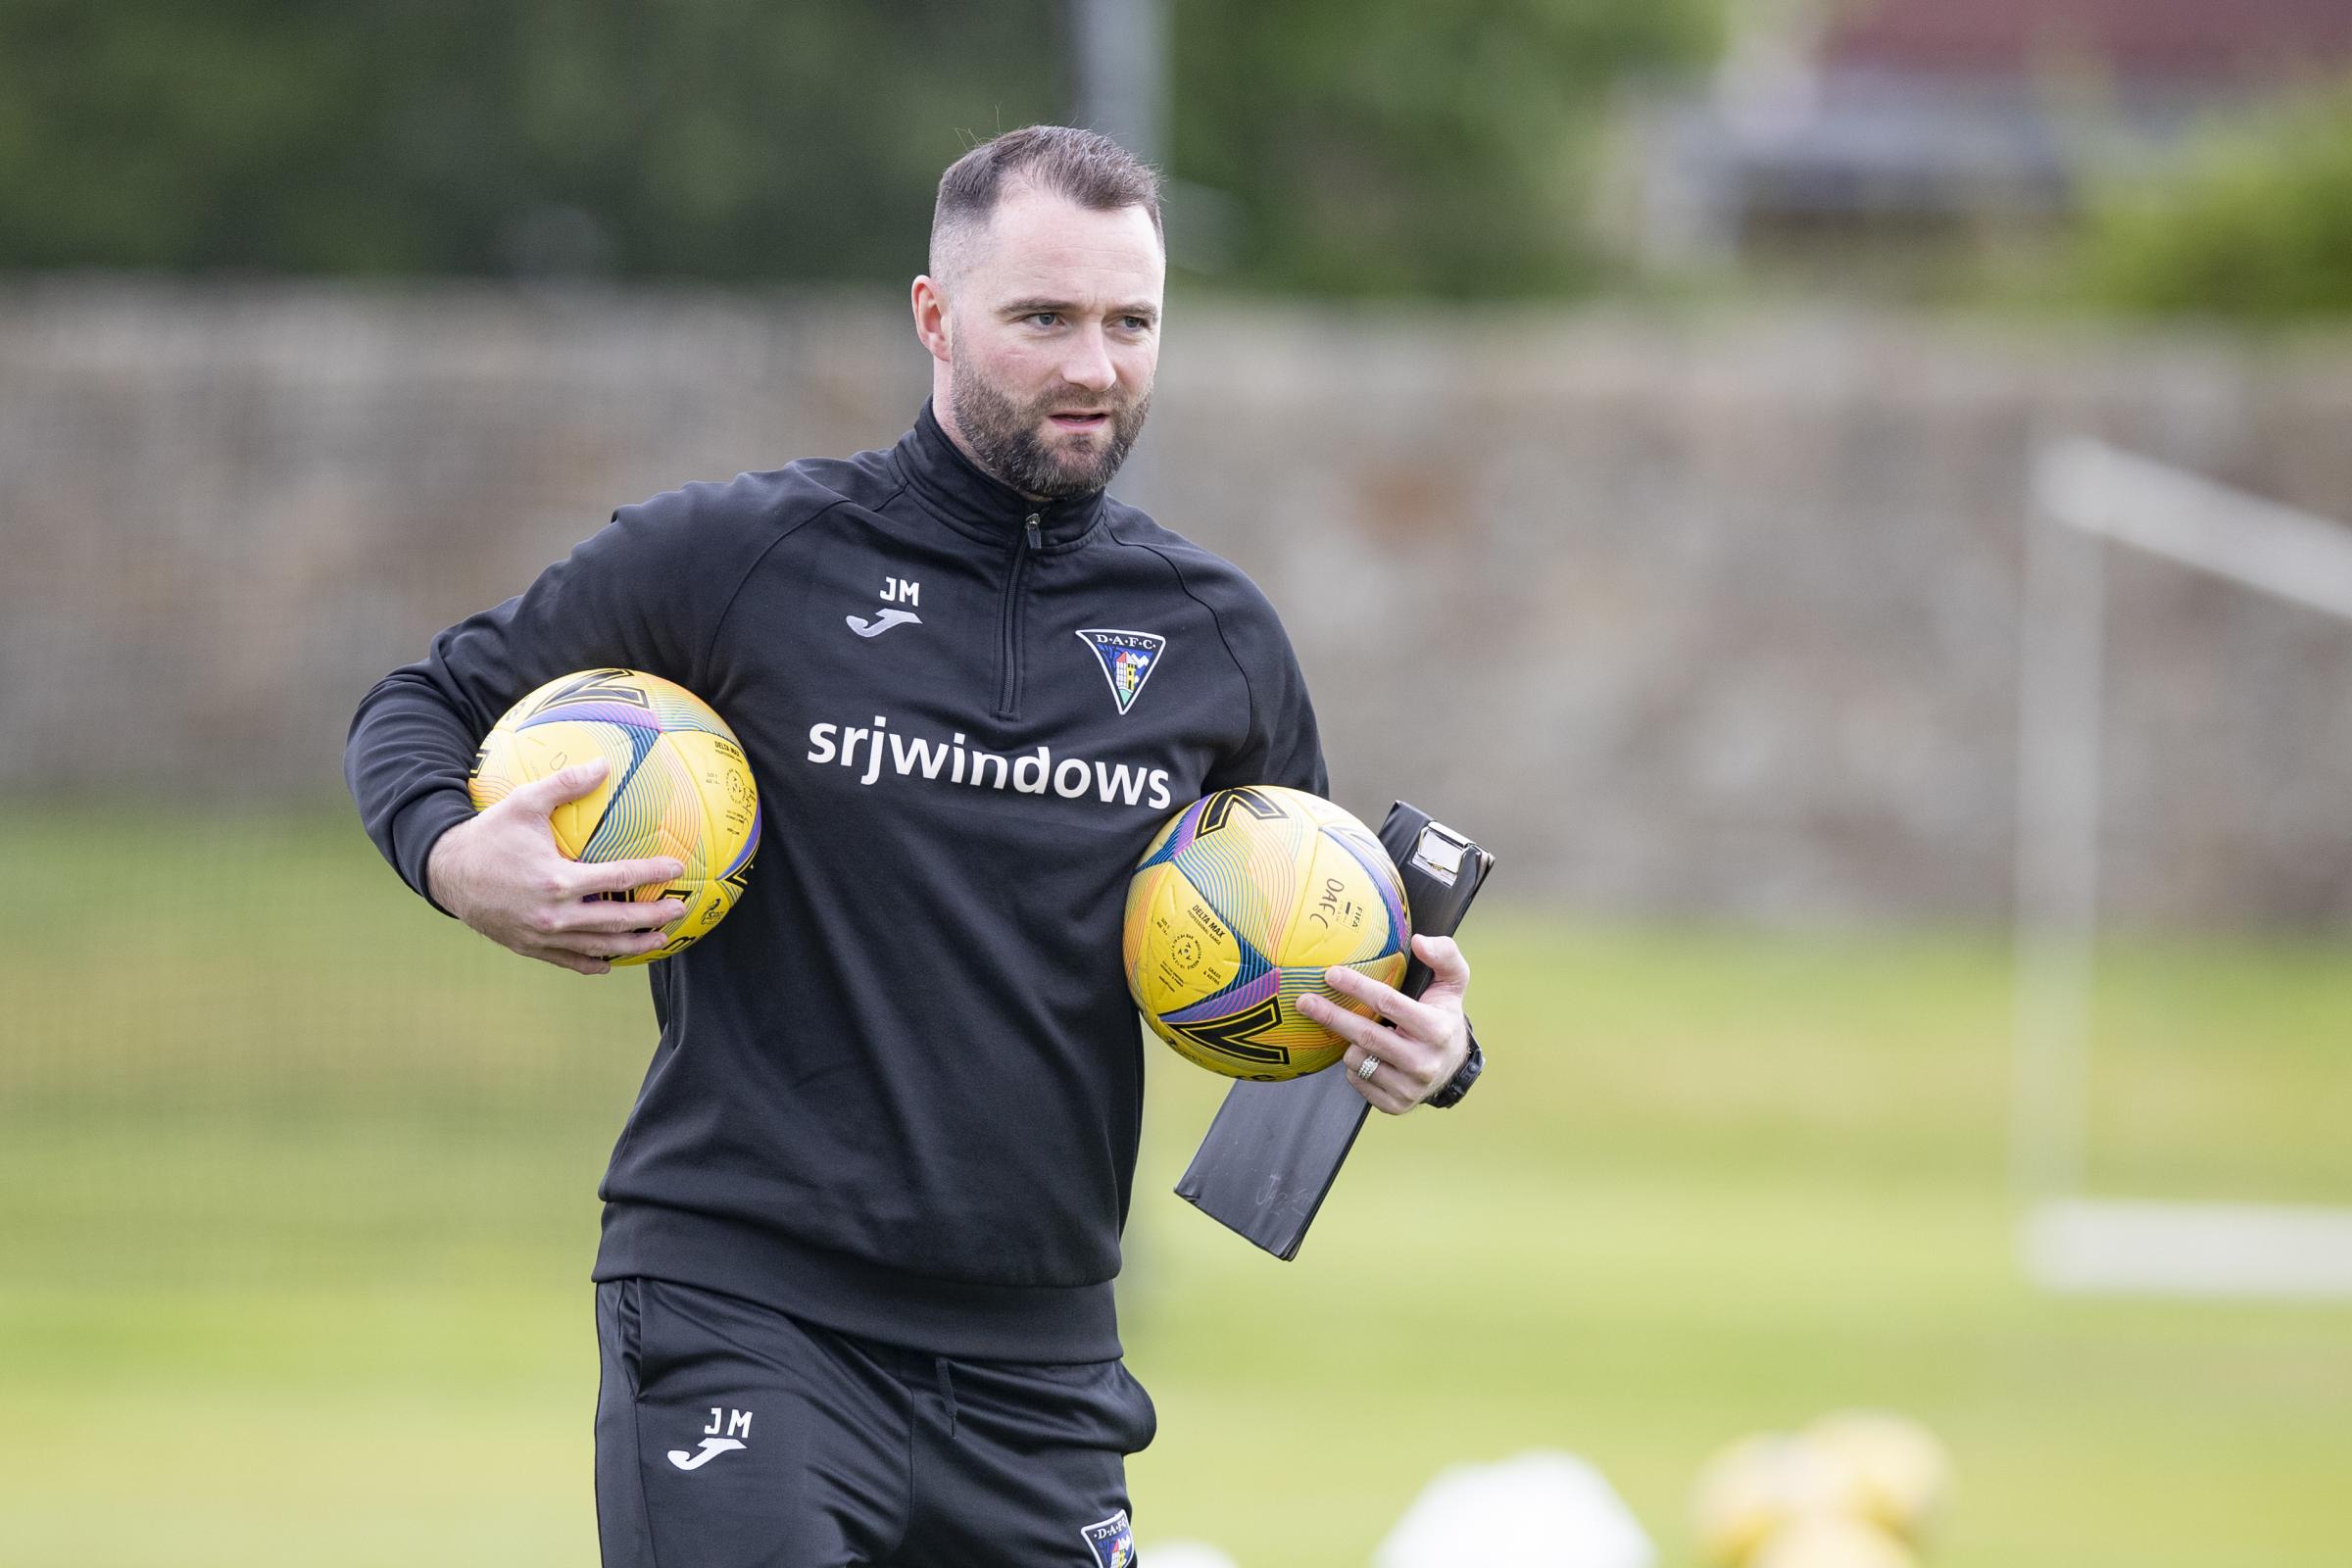 Dunfermline boss promises pre-season will be 'toughest they've ever done'